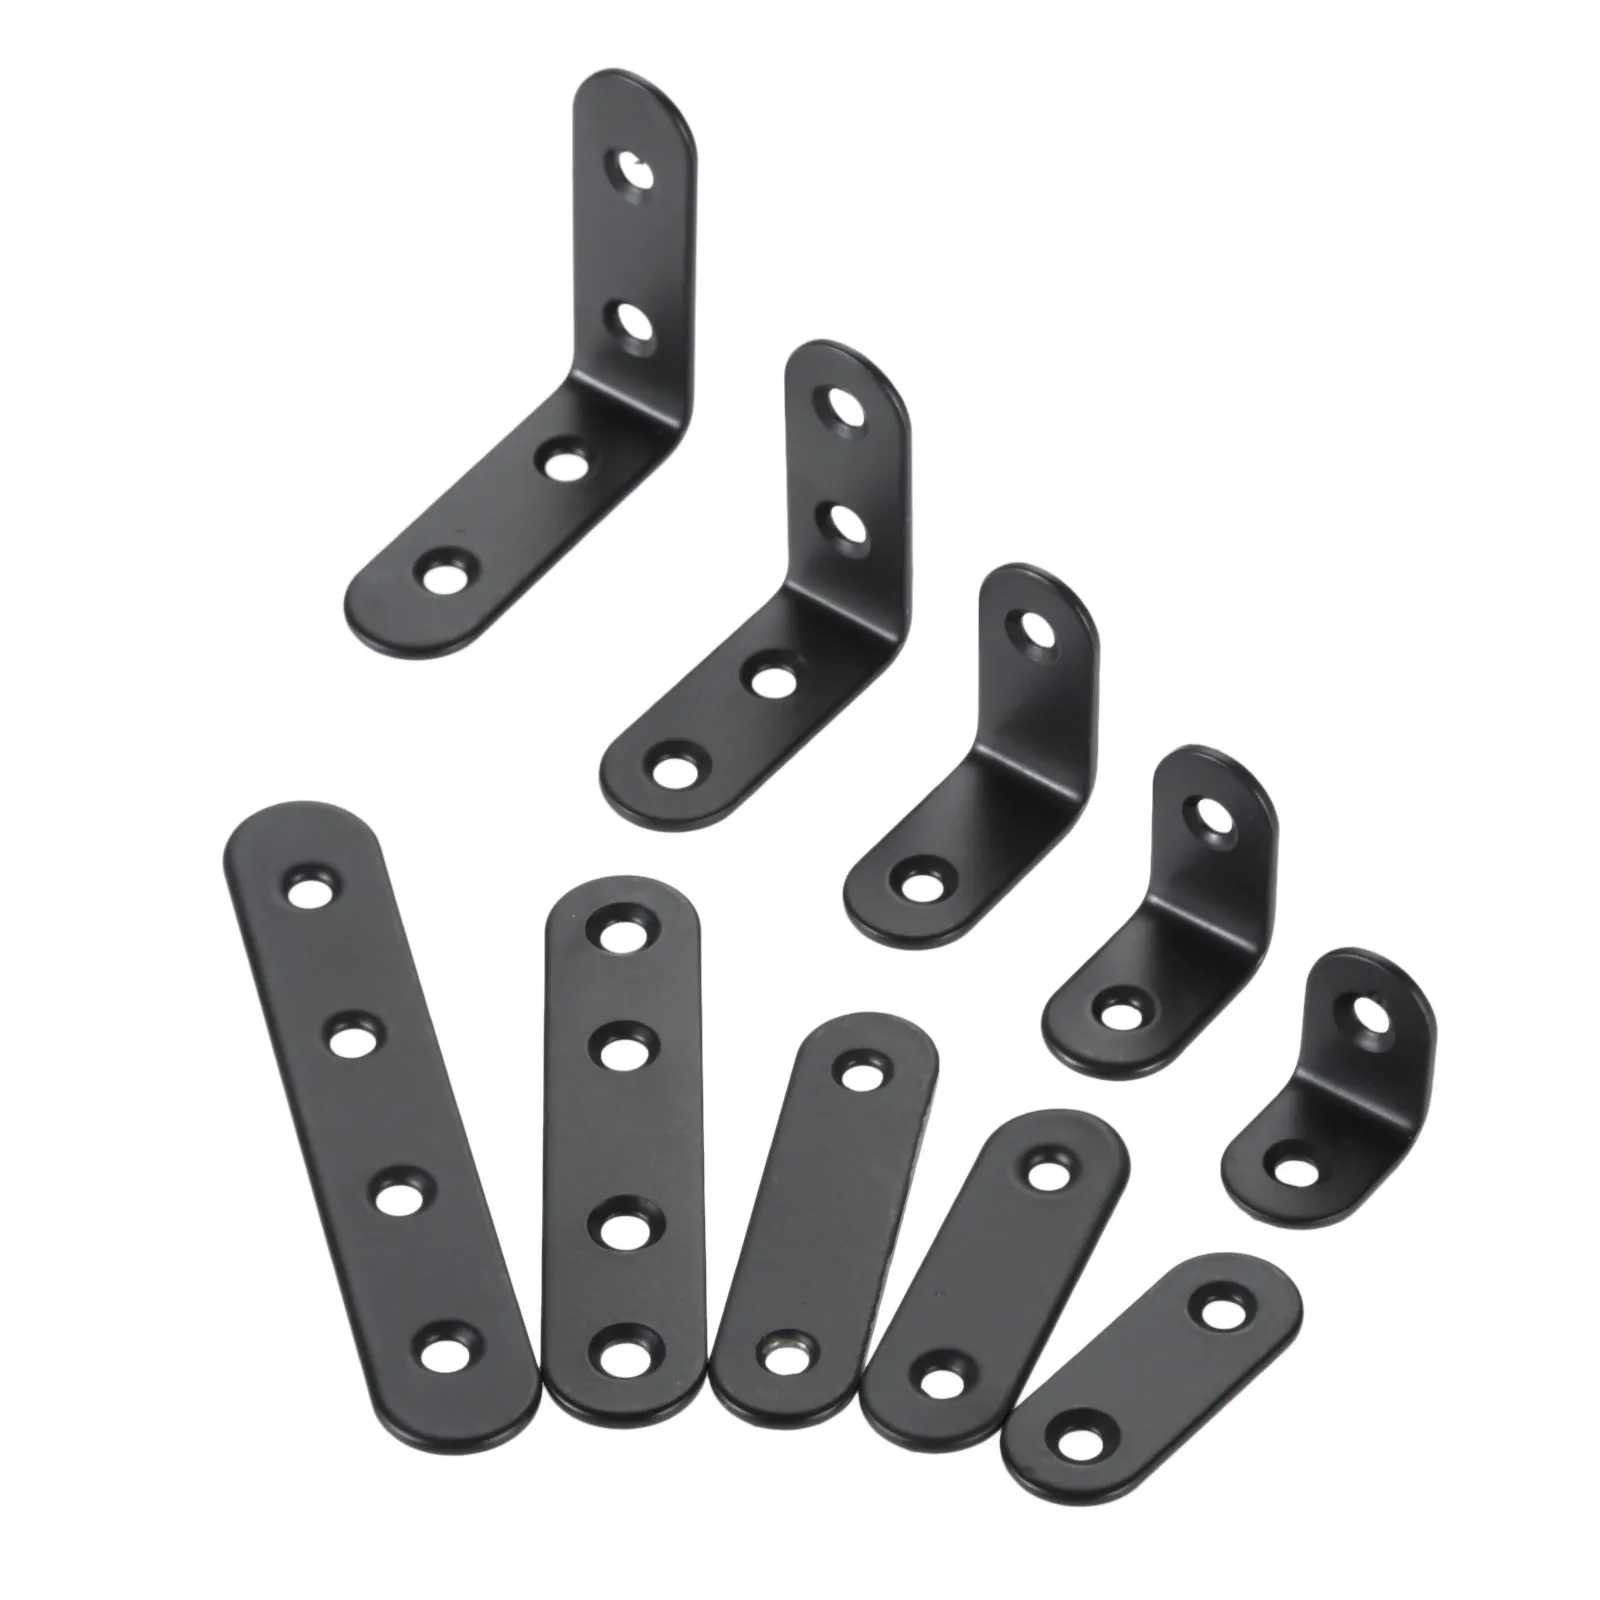 

DRELD 10pcs Stainless Steel Supporting Black L-Shaped Brackets With Screws Fixing Right Angle Corners Brace Furniture Hardware